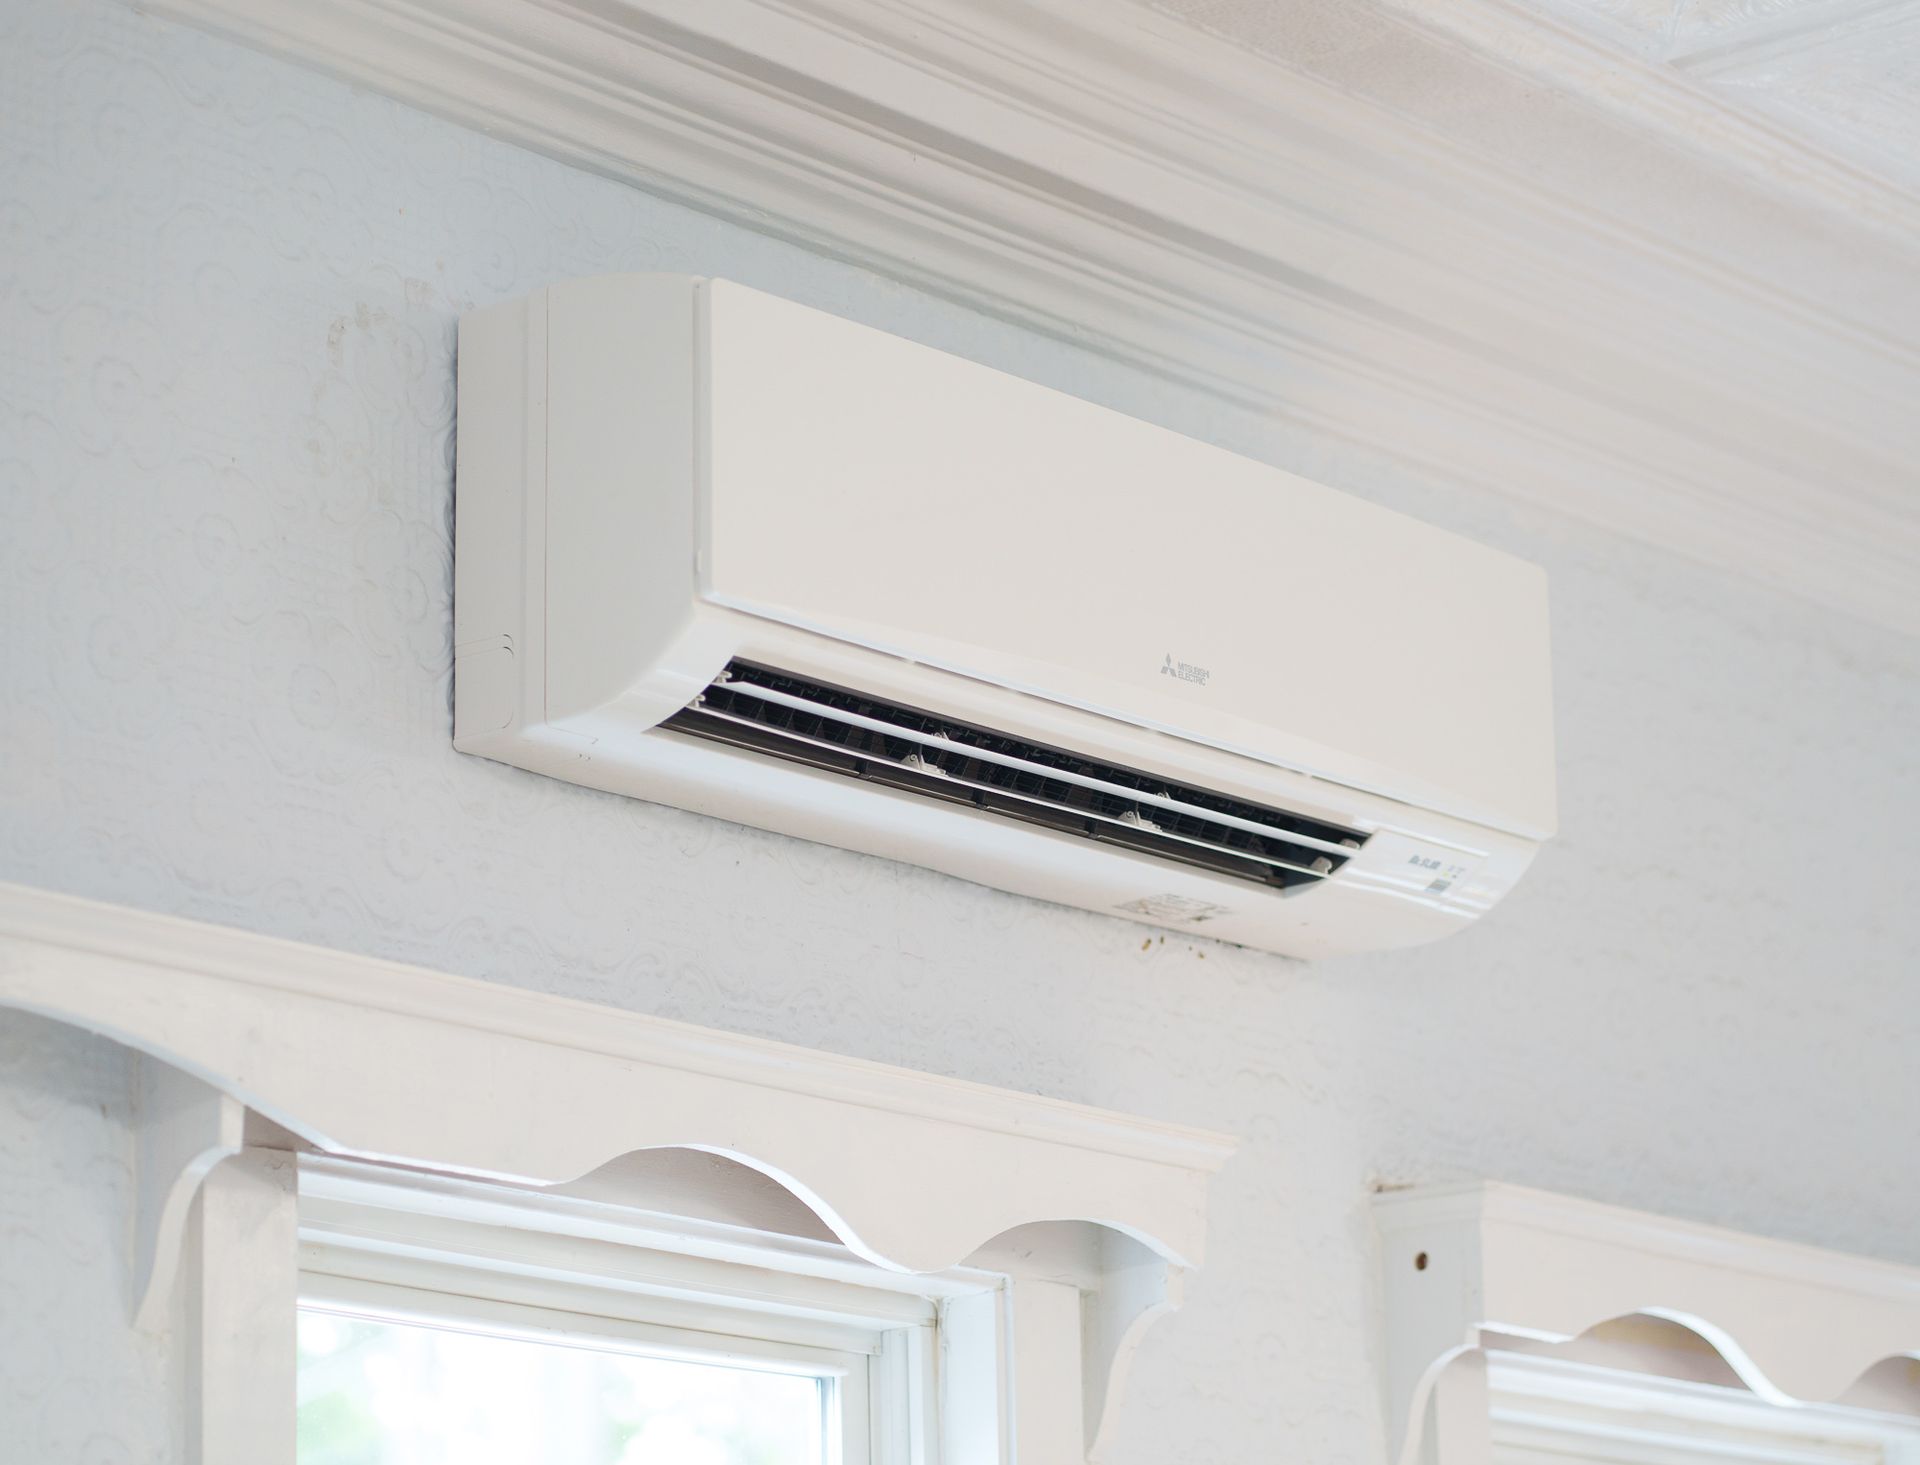 Prevett Heating and Cooling |A white air conditioner is hanging from the ceiling next to a window.